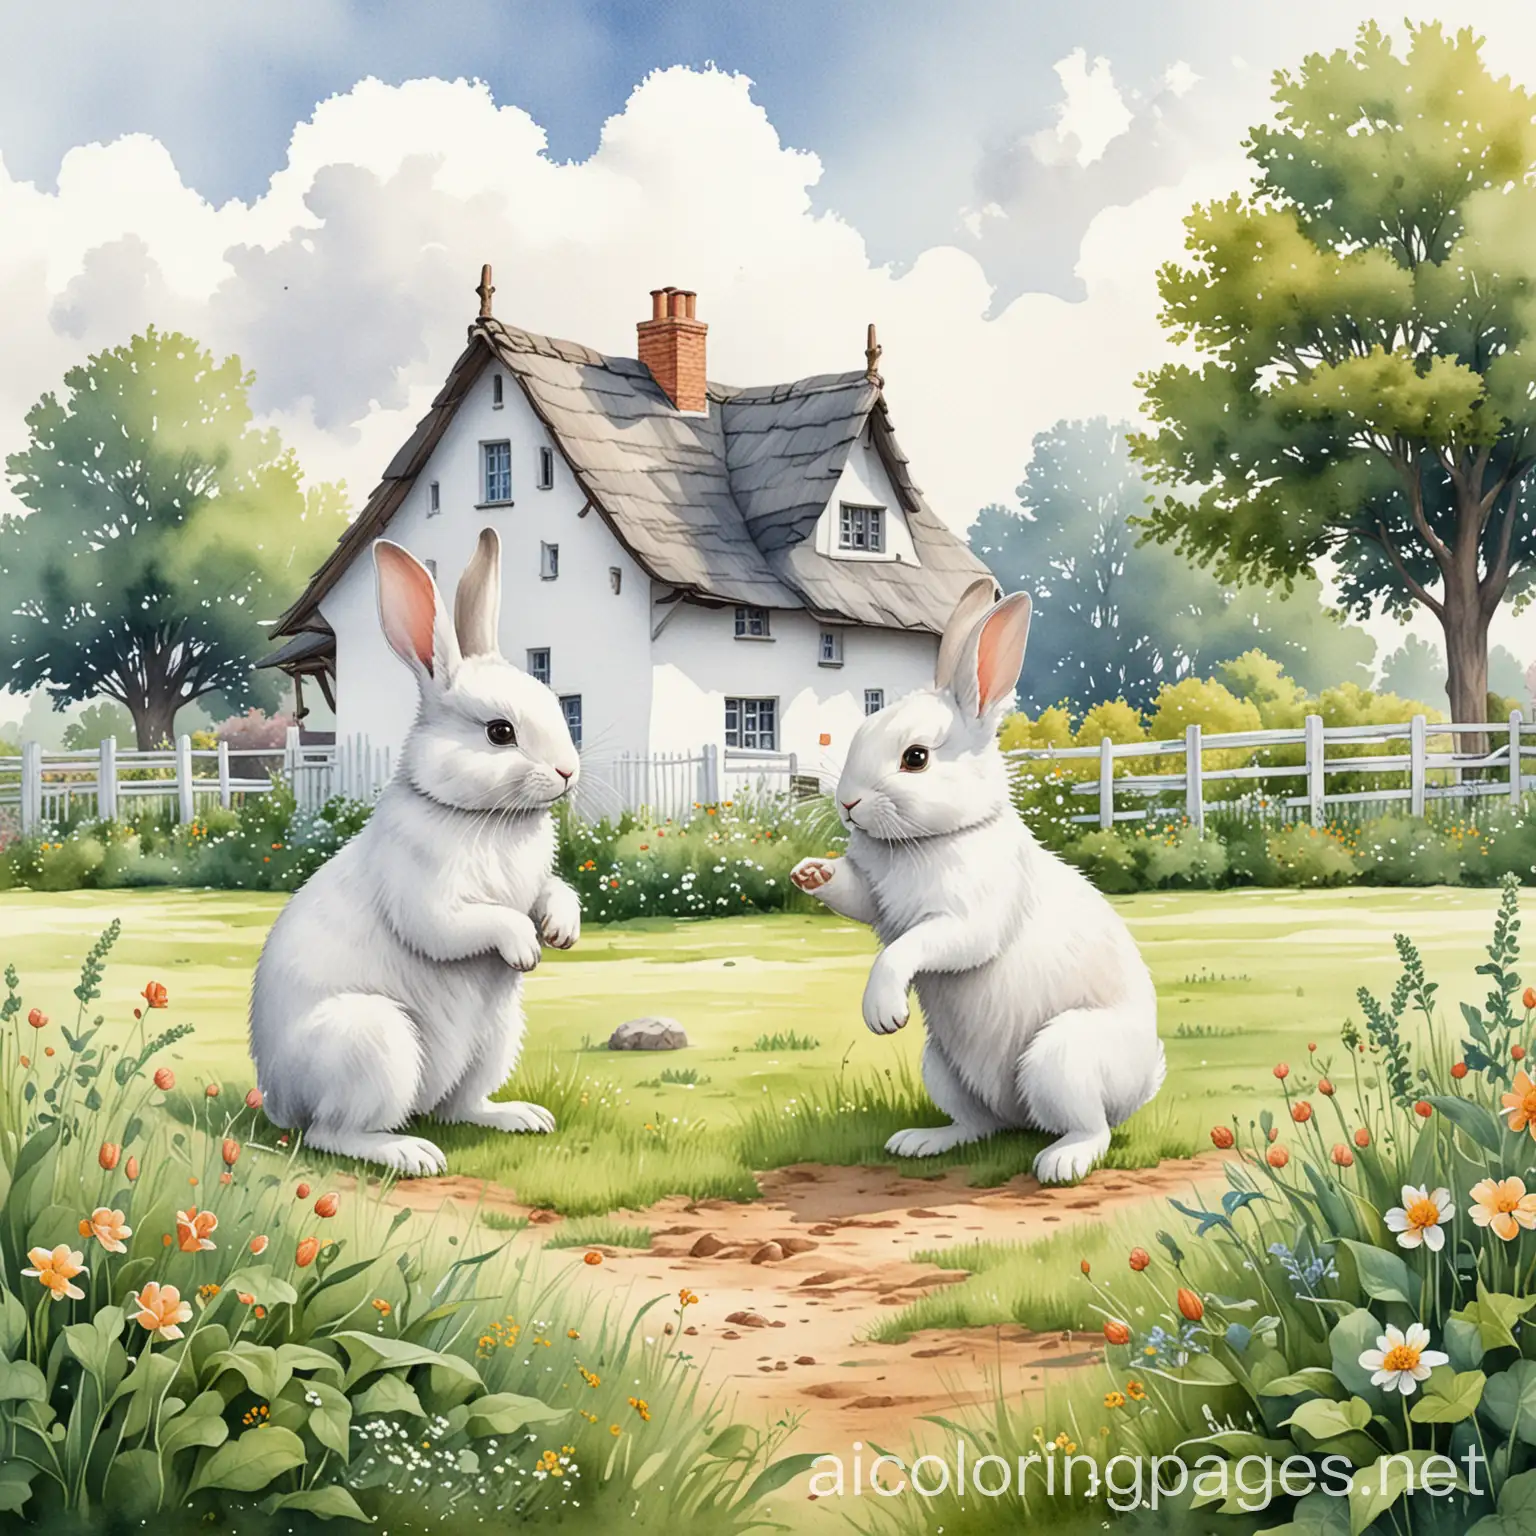 small cute two bunnies playing in a field near a village house watercolour illustration, Coloring Page, black and white, line art, white background, Simplicity, Ample White Space. The background of the coloring page is plain white to make it easy for young children to color within the lines. The outlines of all the subjects are easy to distinguish, making it simple for kids to color without too much difficulty